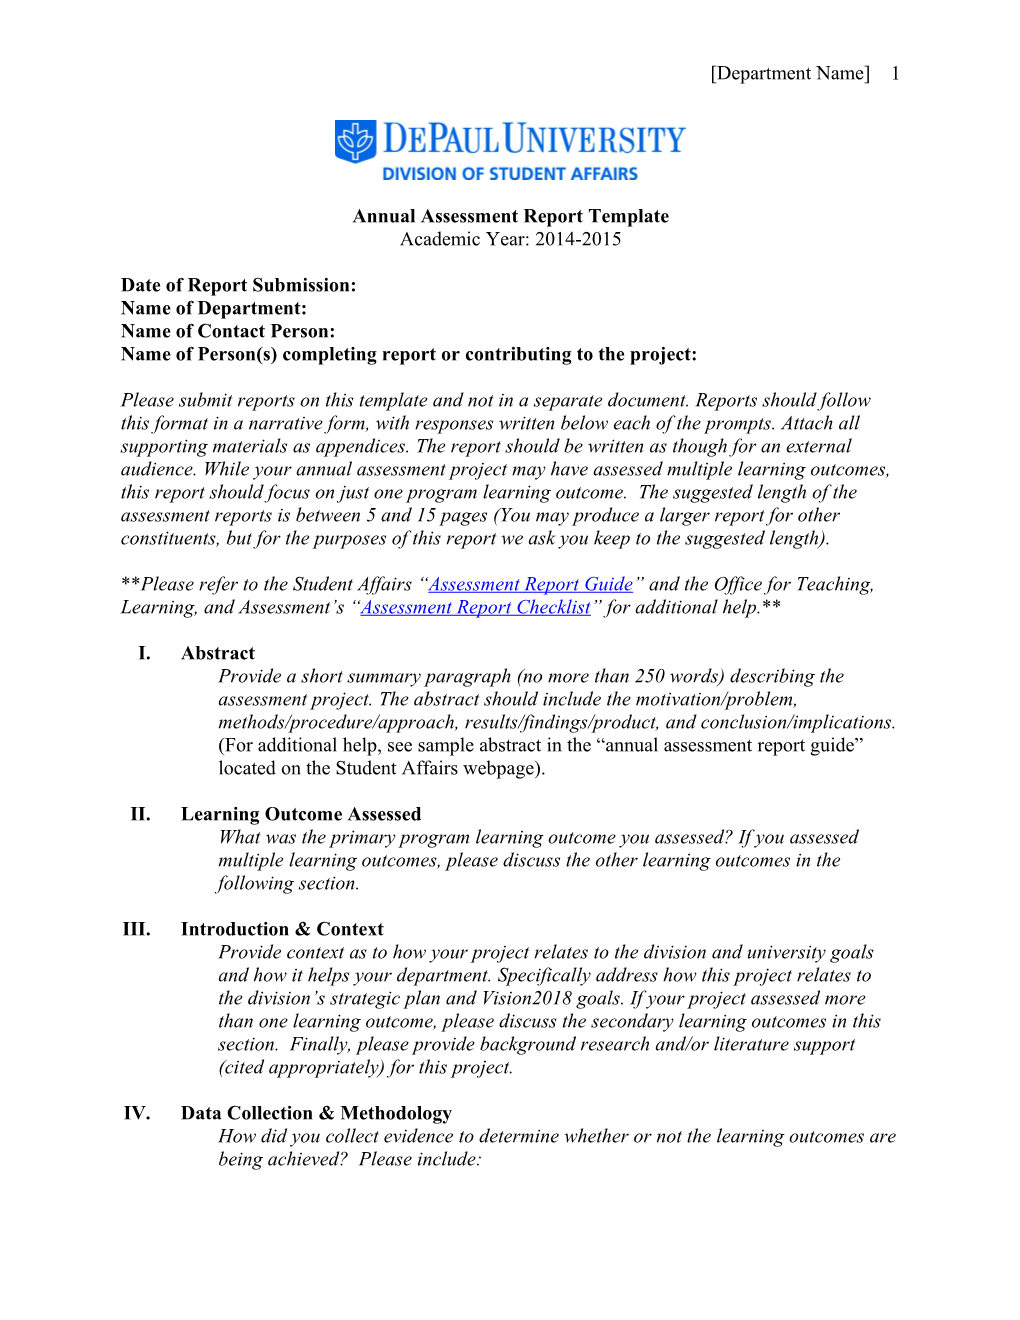 Annual Assessment Report Template